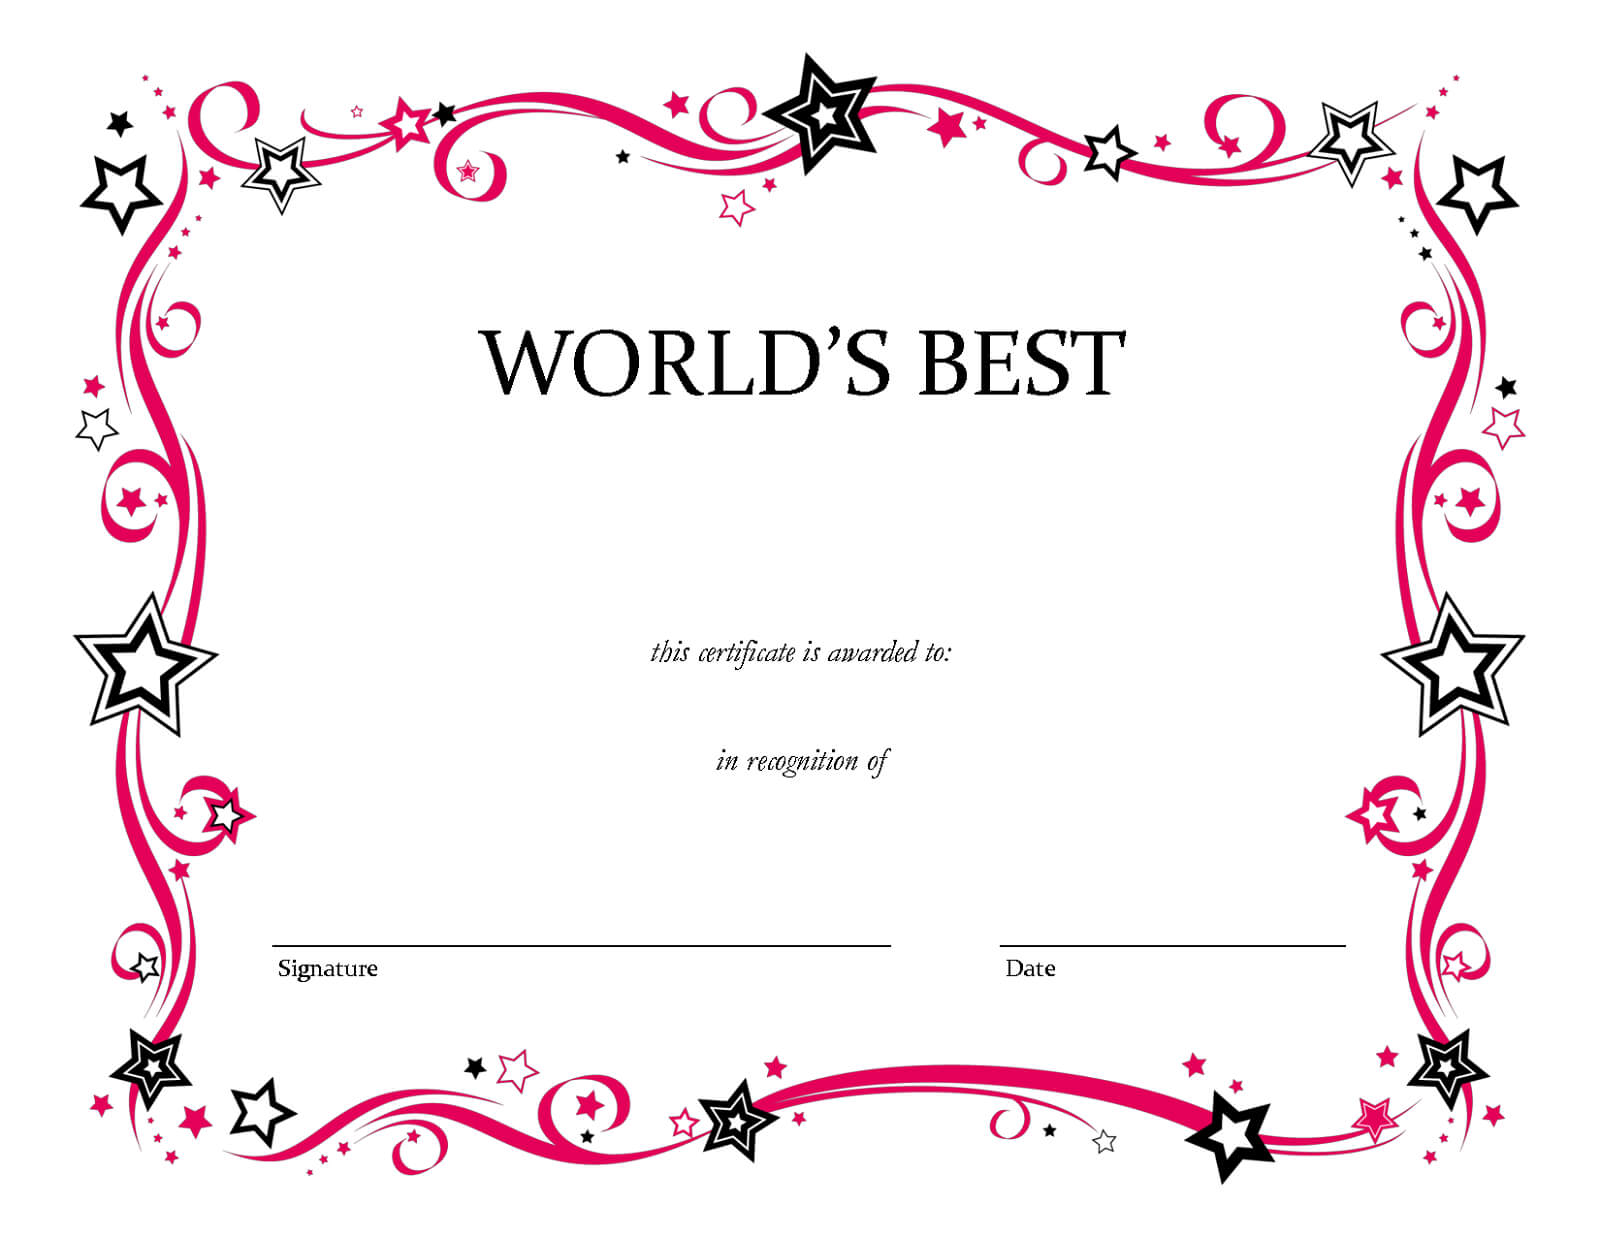 Blank Certificate Templates To Print | Activity Shelter Inside Pages Certificate Templates